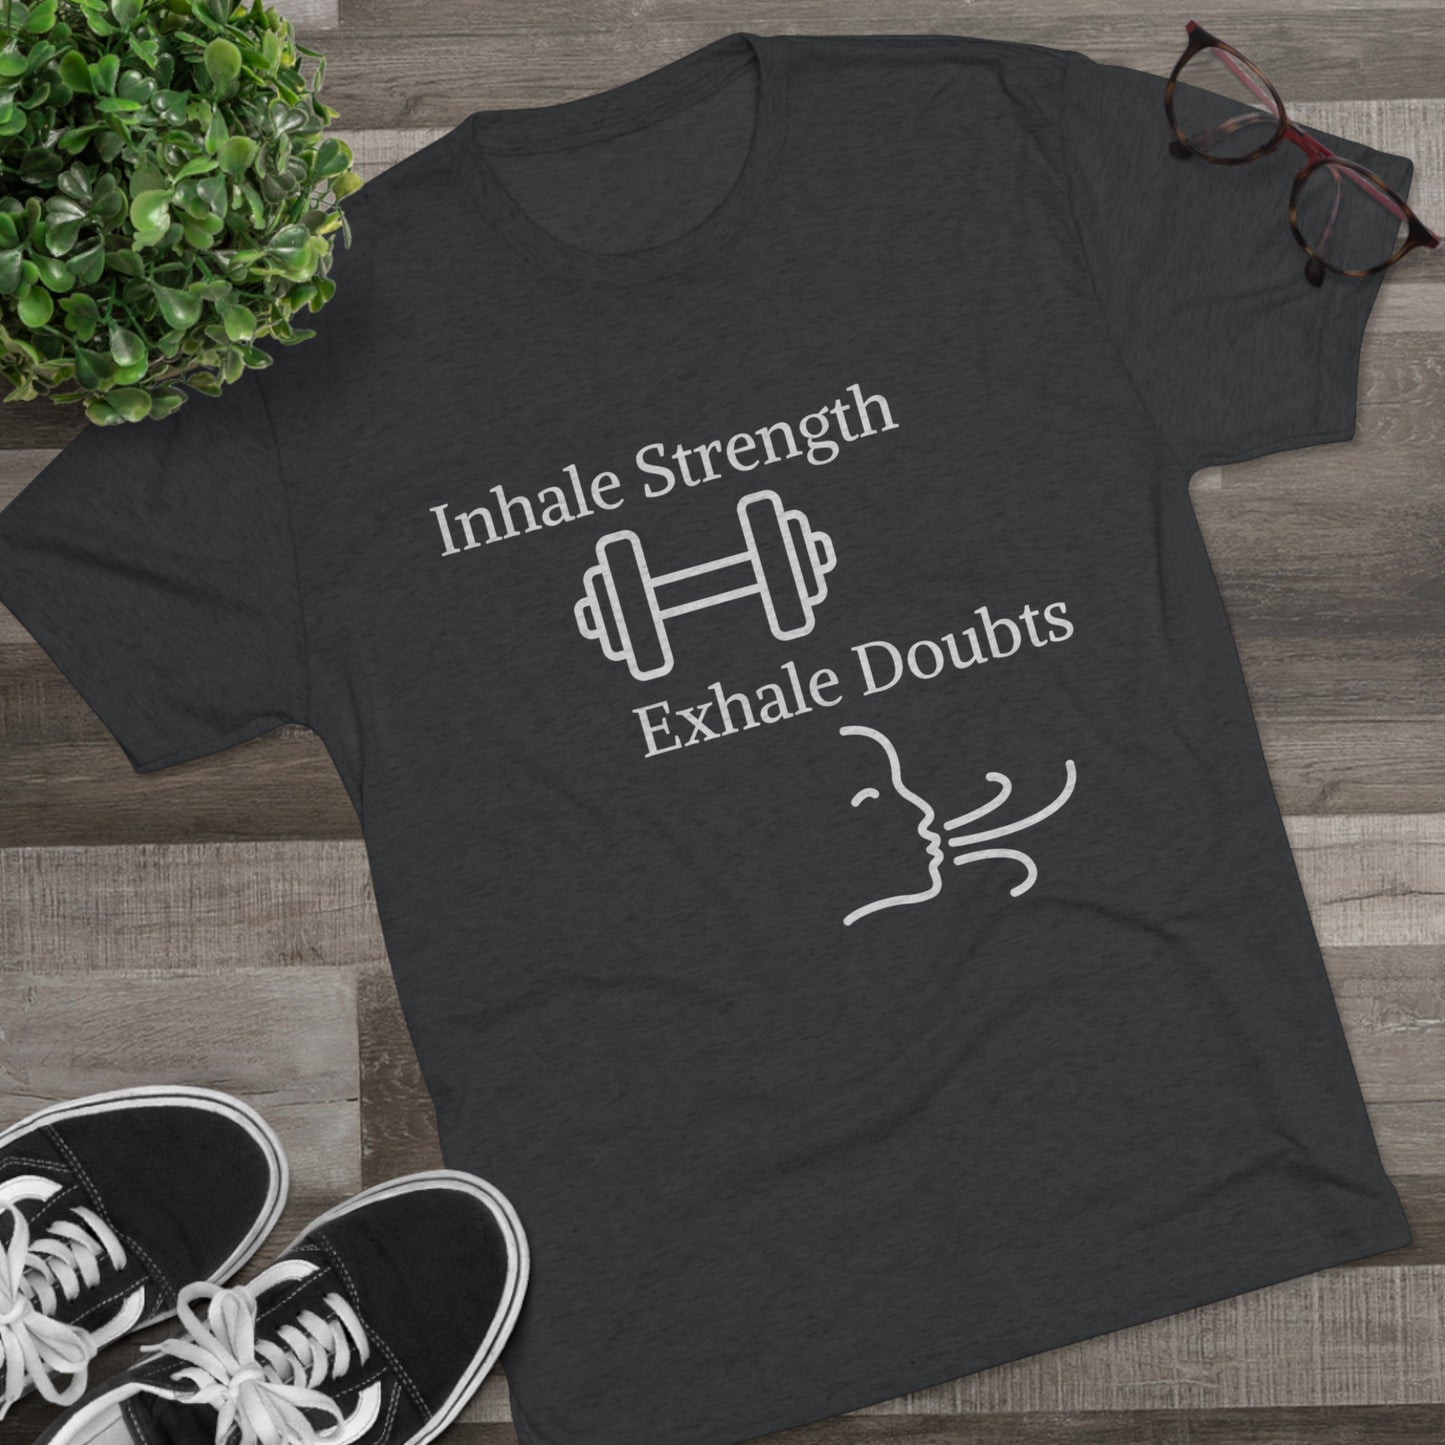 A gray motivational Printify t-shirt with the phrase "Inhale Strength Exhale Doubt w Images" and a graphic of a dumbbell and swirls, laid flat on a wooden surface alongside sneakers and glasses.